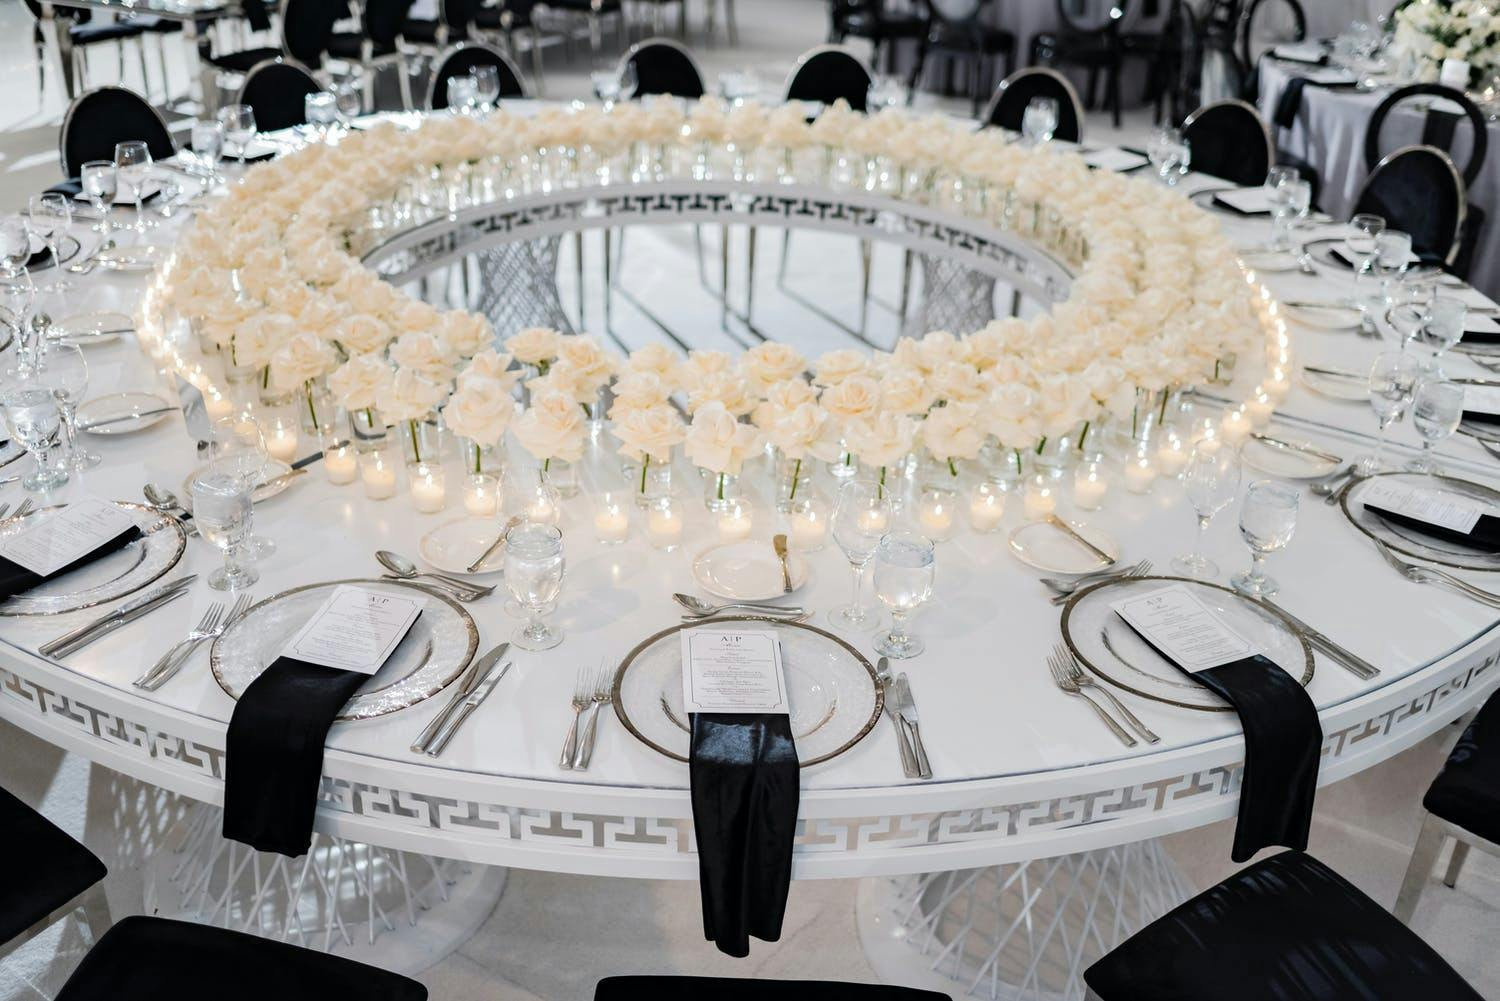 Torus-Shaped Wedding Reception Table With Black and White Wedding Décor | PartySlate